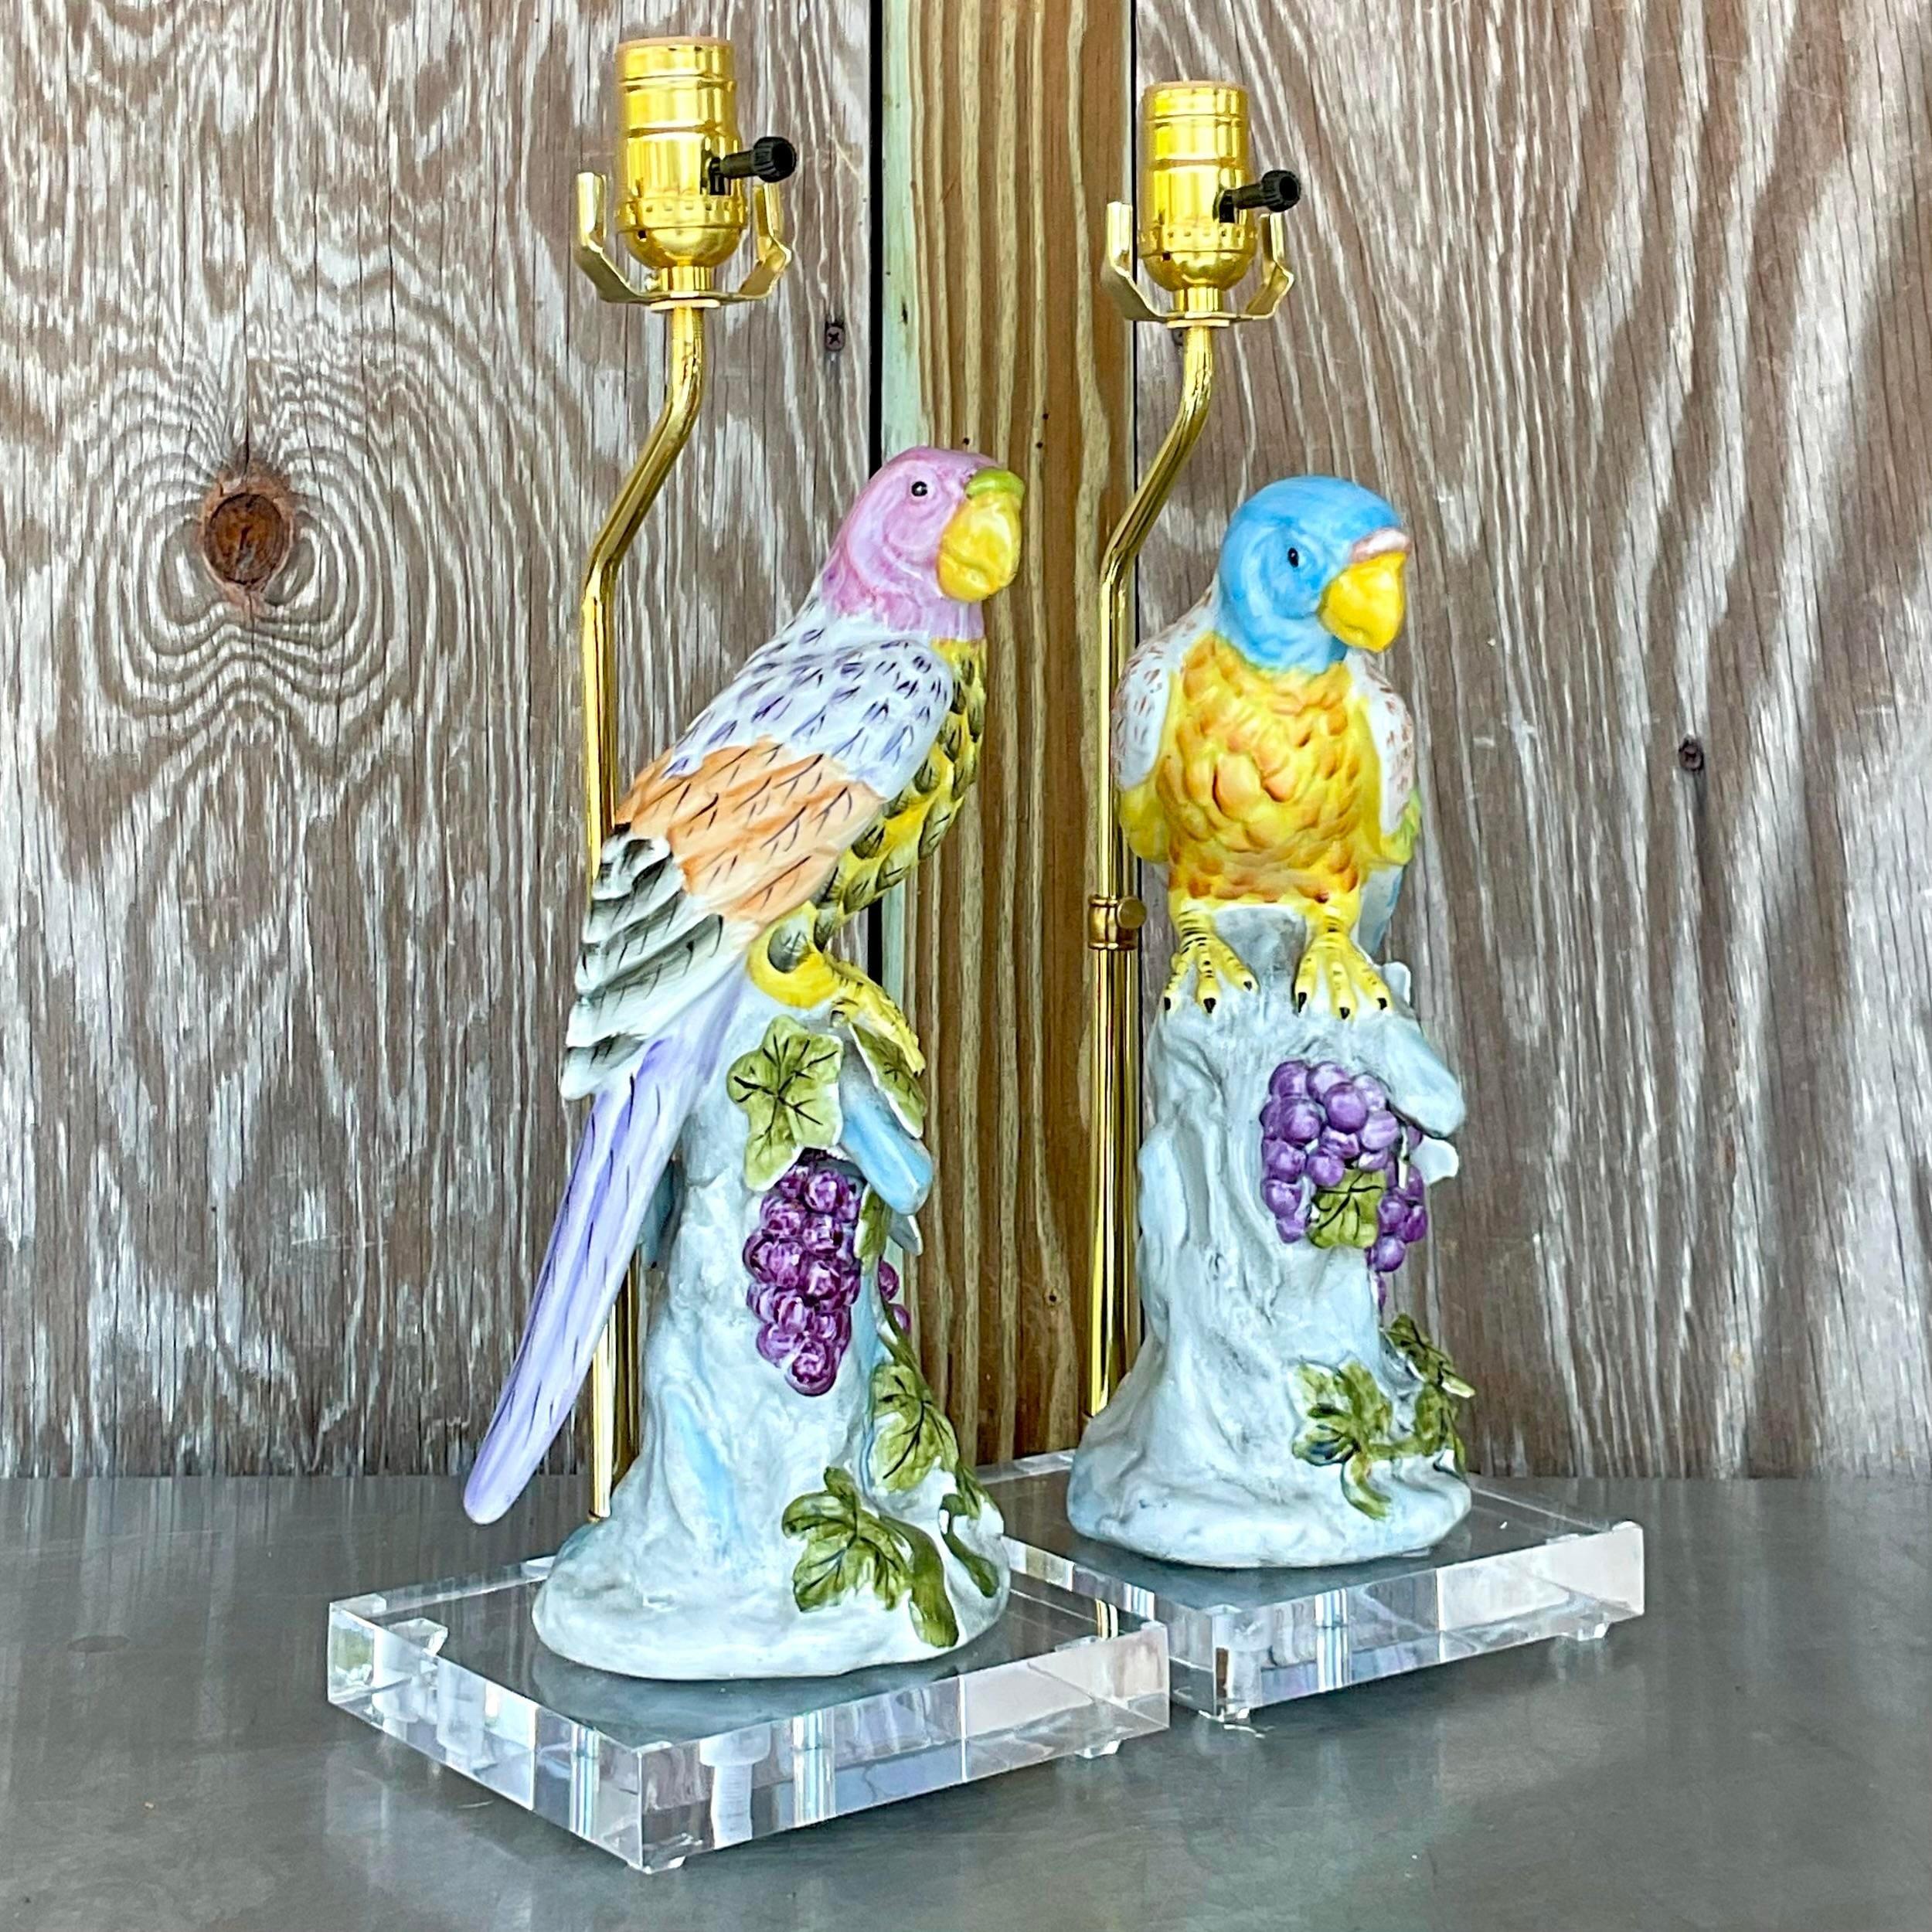 Vintage Regency Glazed Ceramic Parrot Lamps - a Pair In Good Condition For Sale In west palm beach, FL